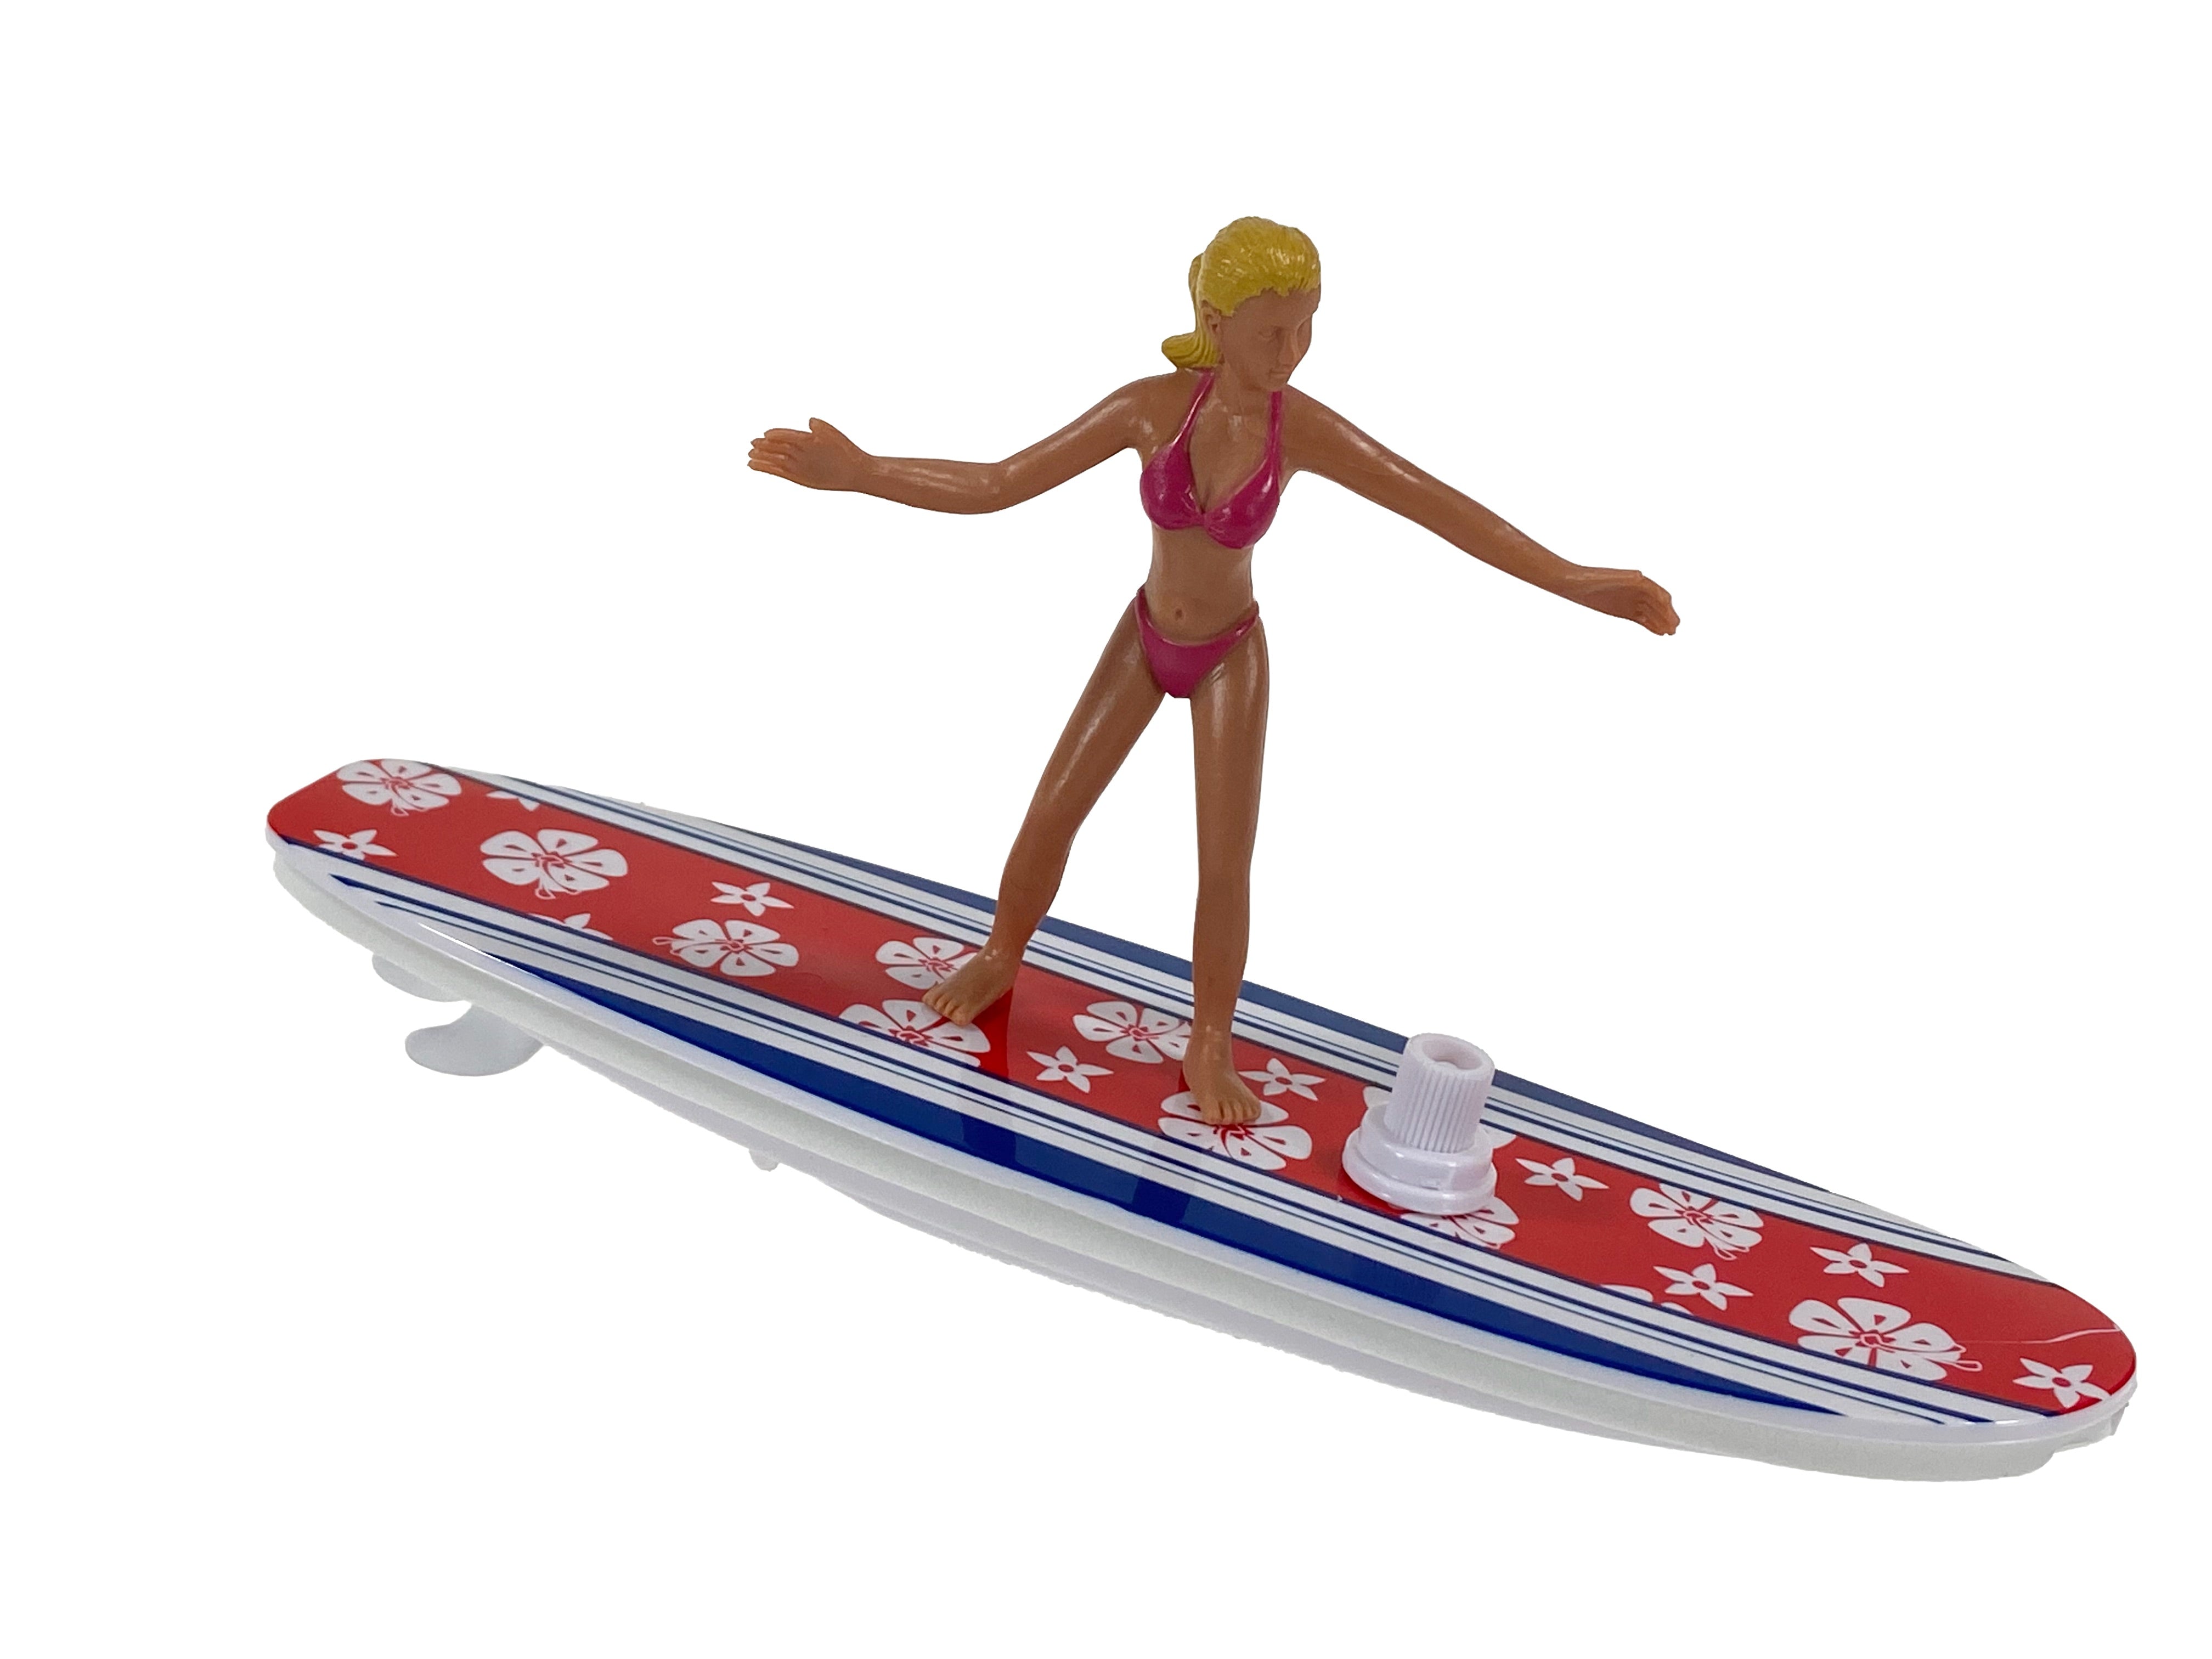 Wind Up Surfers (Single) - Assorted Styles    